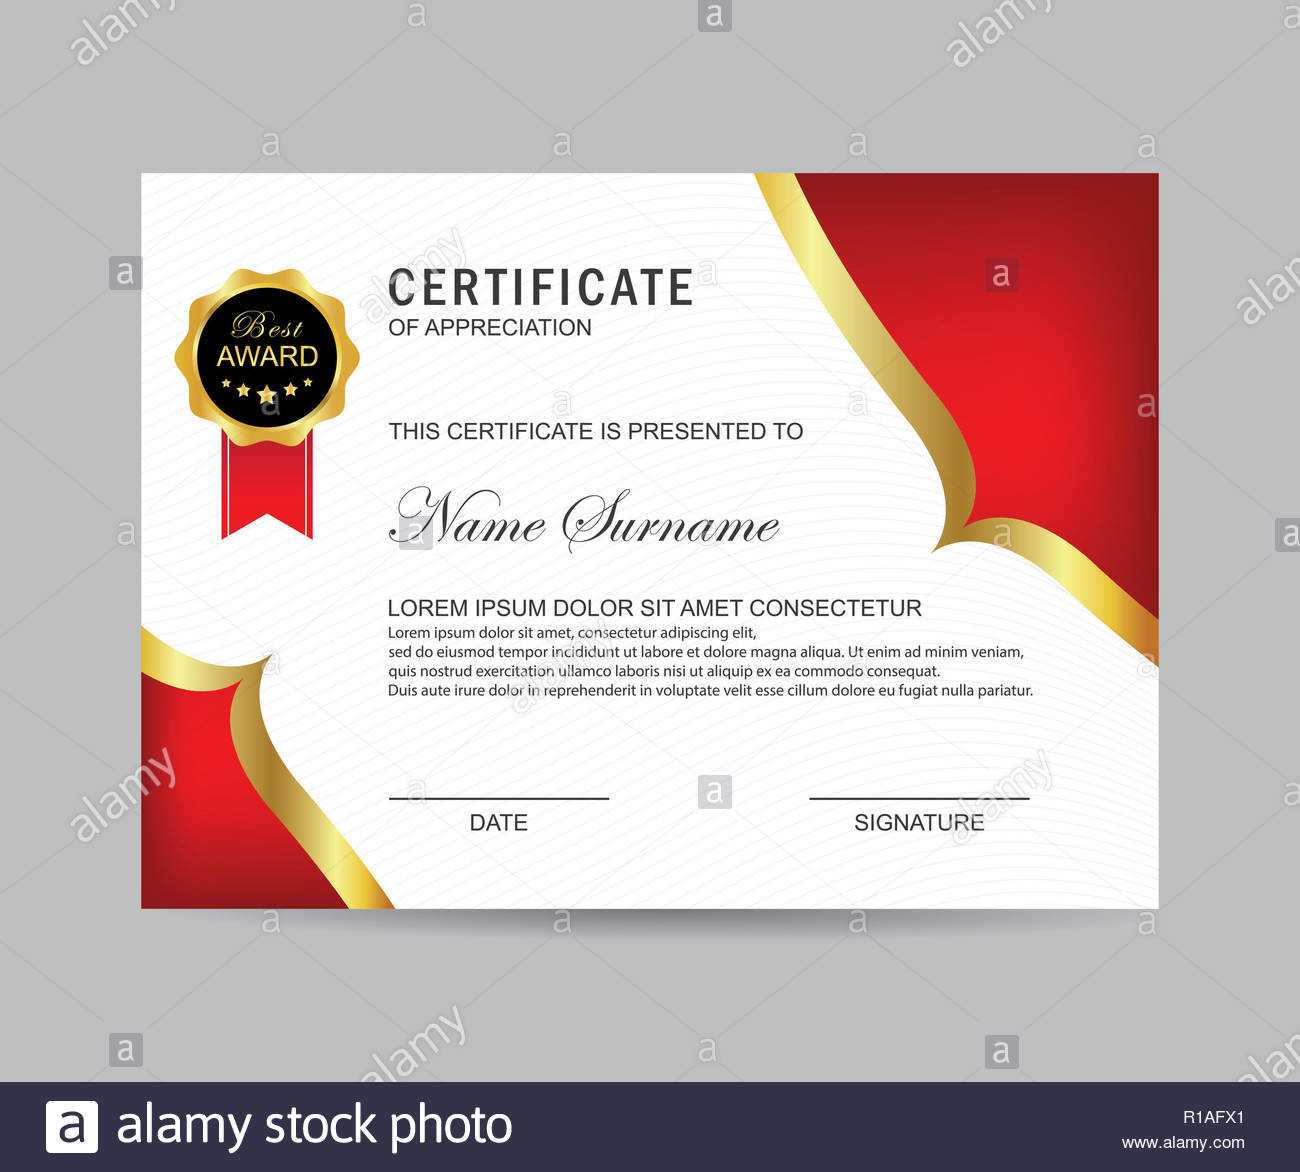 Modern Certificate Template And Background Stock Photo For Borderless Certificate Templates